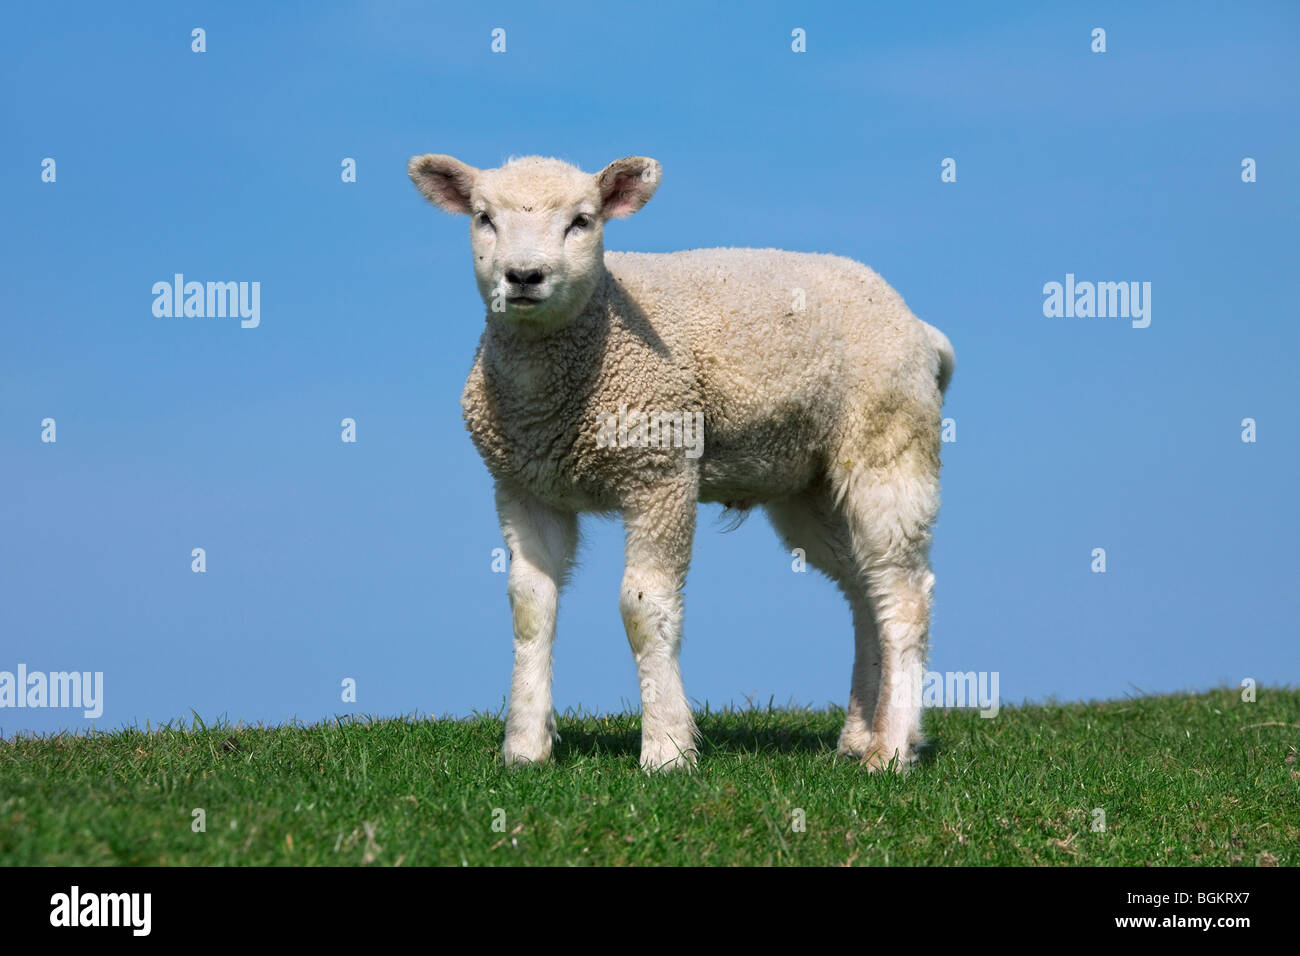 Domestic sheep (Ovis aries) portrait of white lamb in meadow, Germany Stock Photo